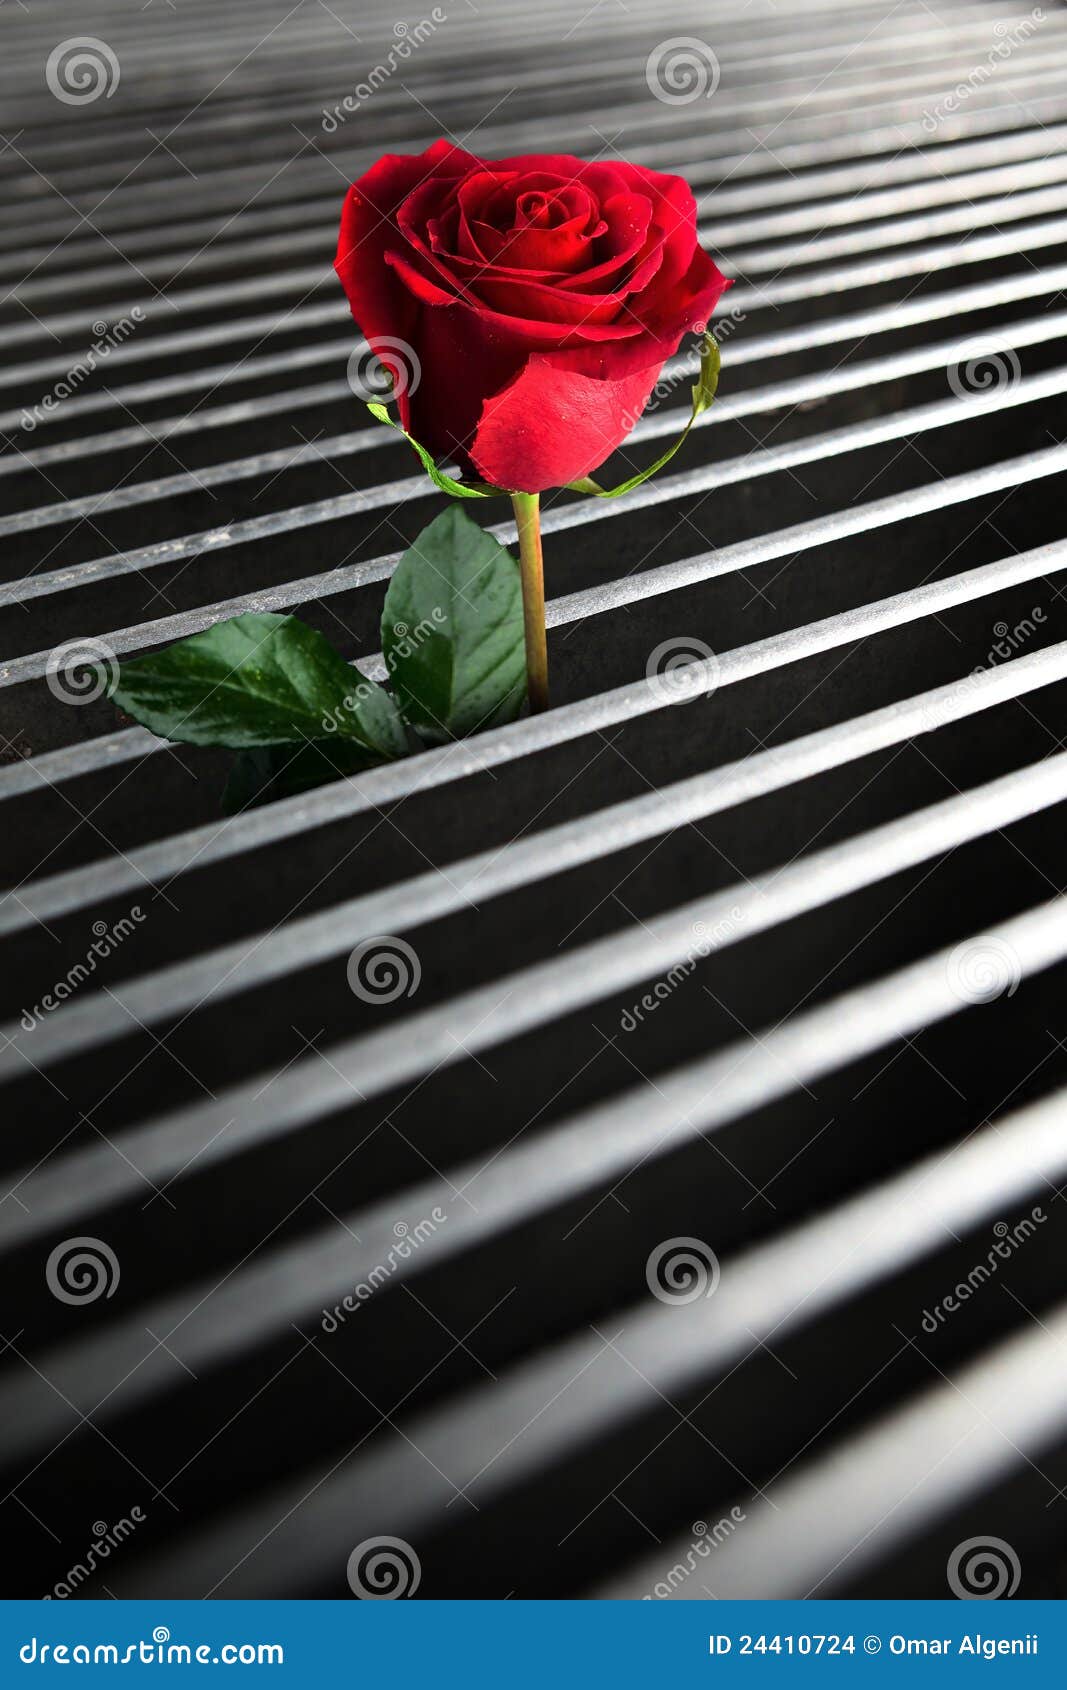 Arising red rose. Red rose arise fron yhe bottom of the manhole